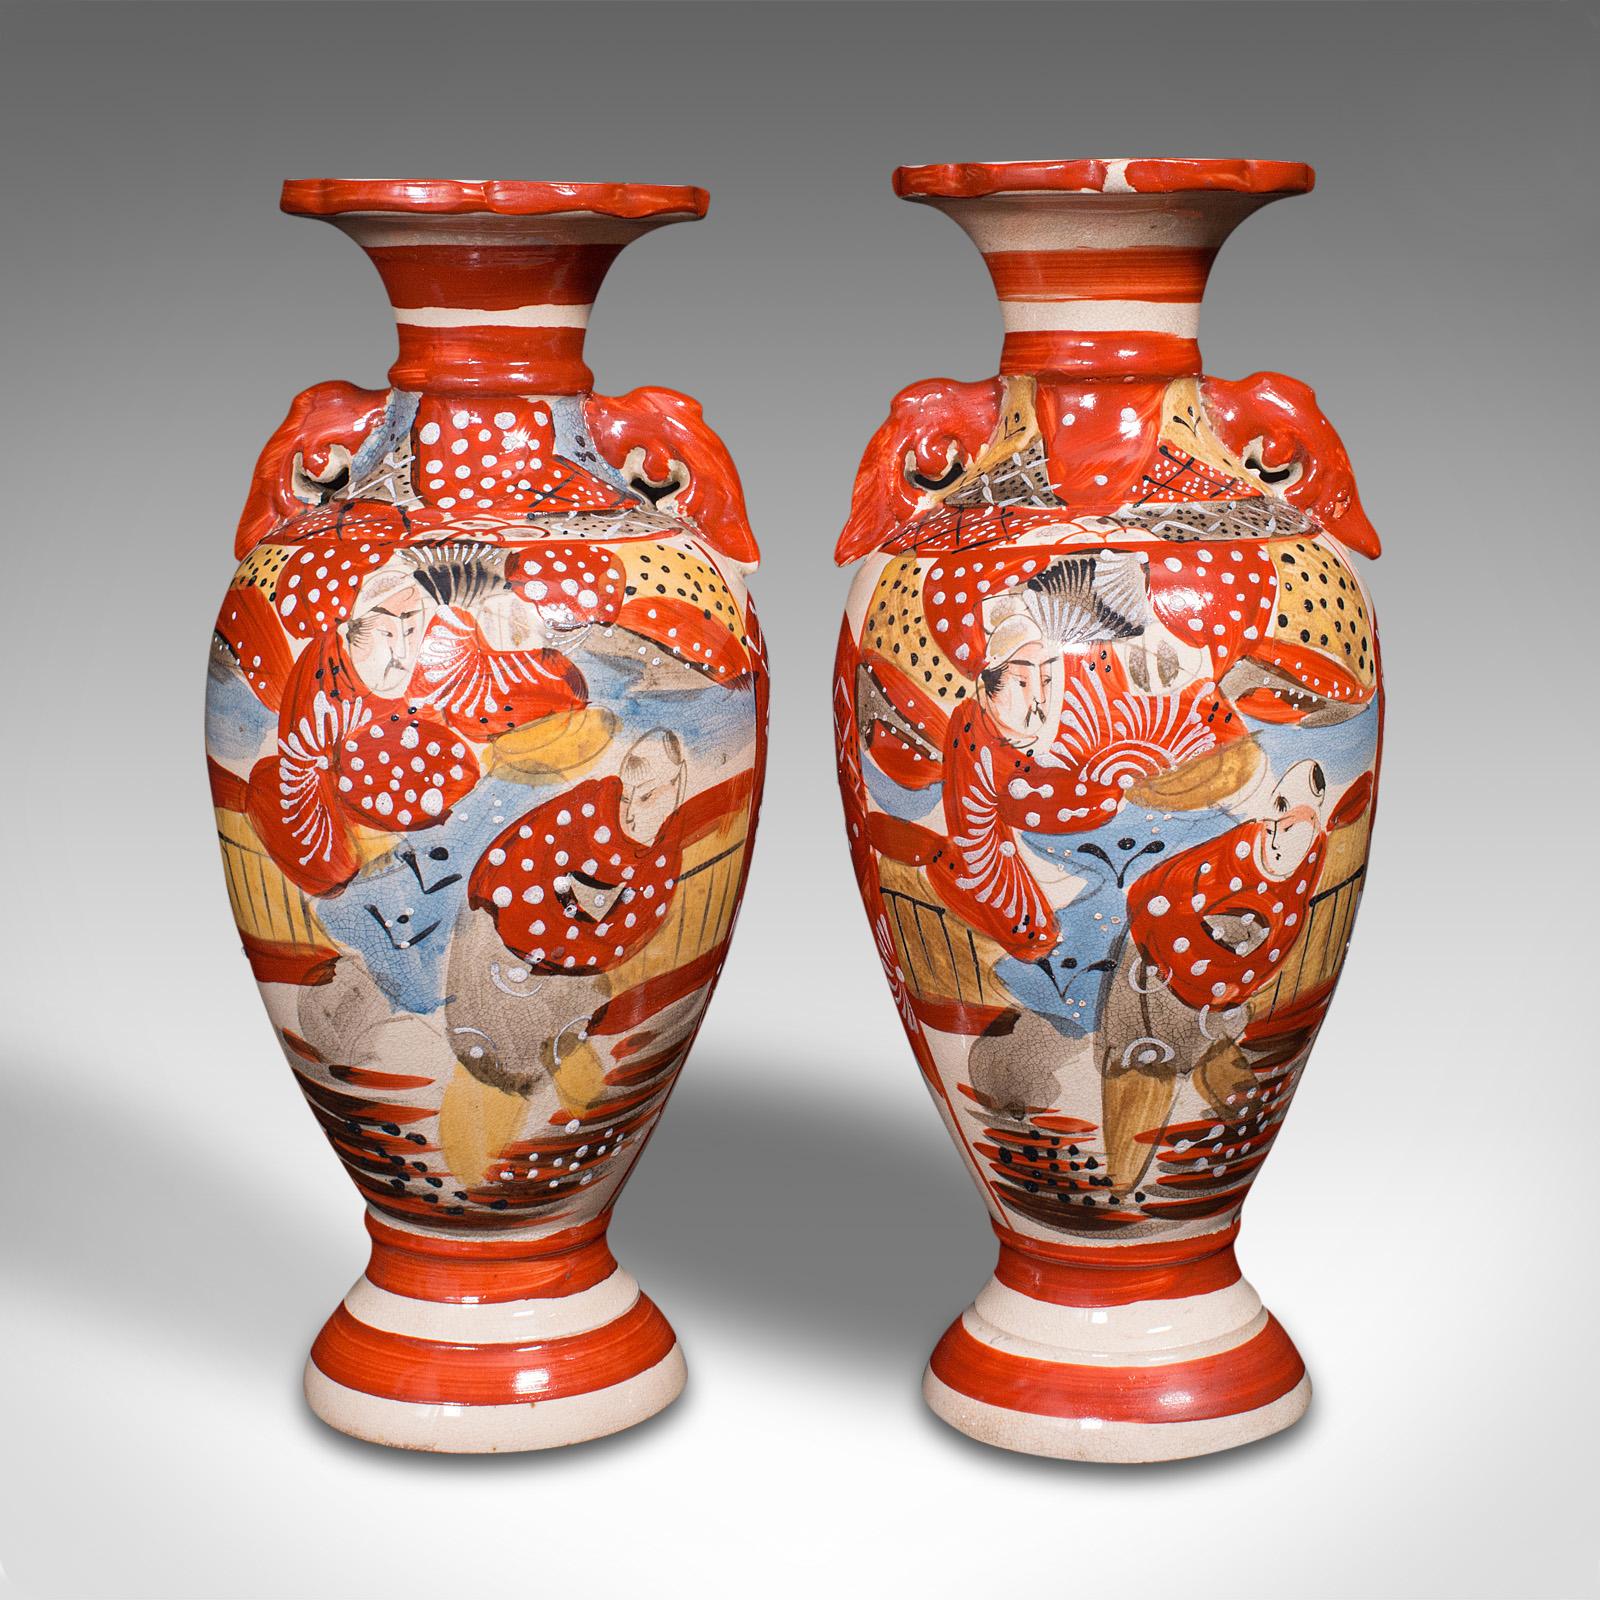 This is a pair of antique Imari vases. A Japanese, hand-painted ceramic baluster urn, dating to the Victorian period, circa 1900.

Superb colour and traditional Japanese decoration
Displaying a desirable aged patina and in good